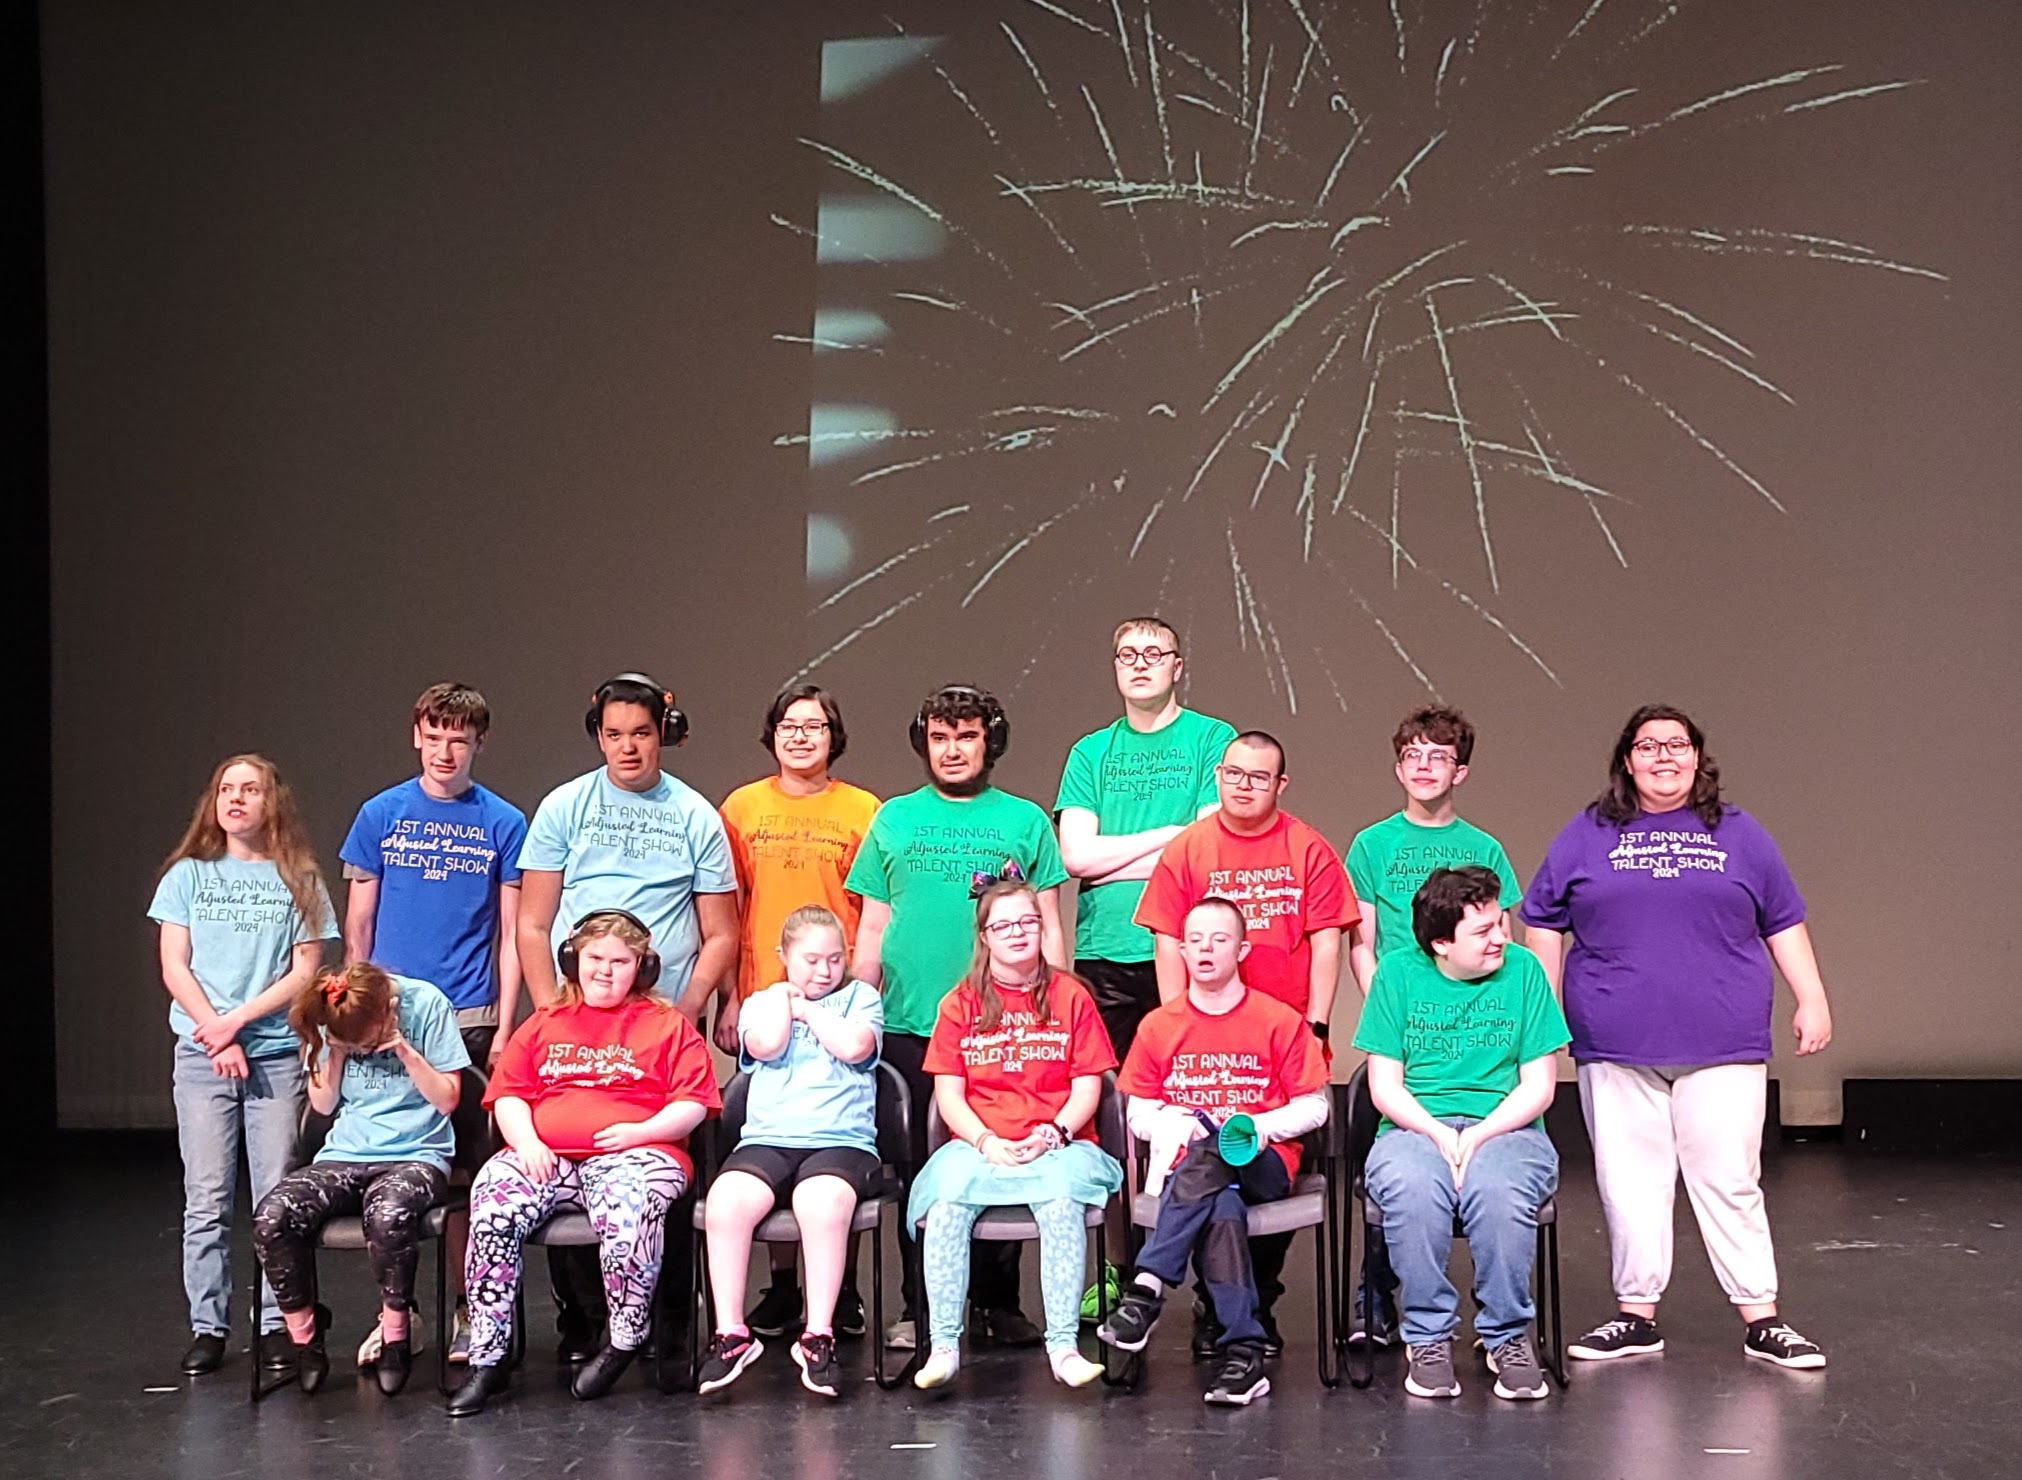 Students on stage wearing talent show t-shirts